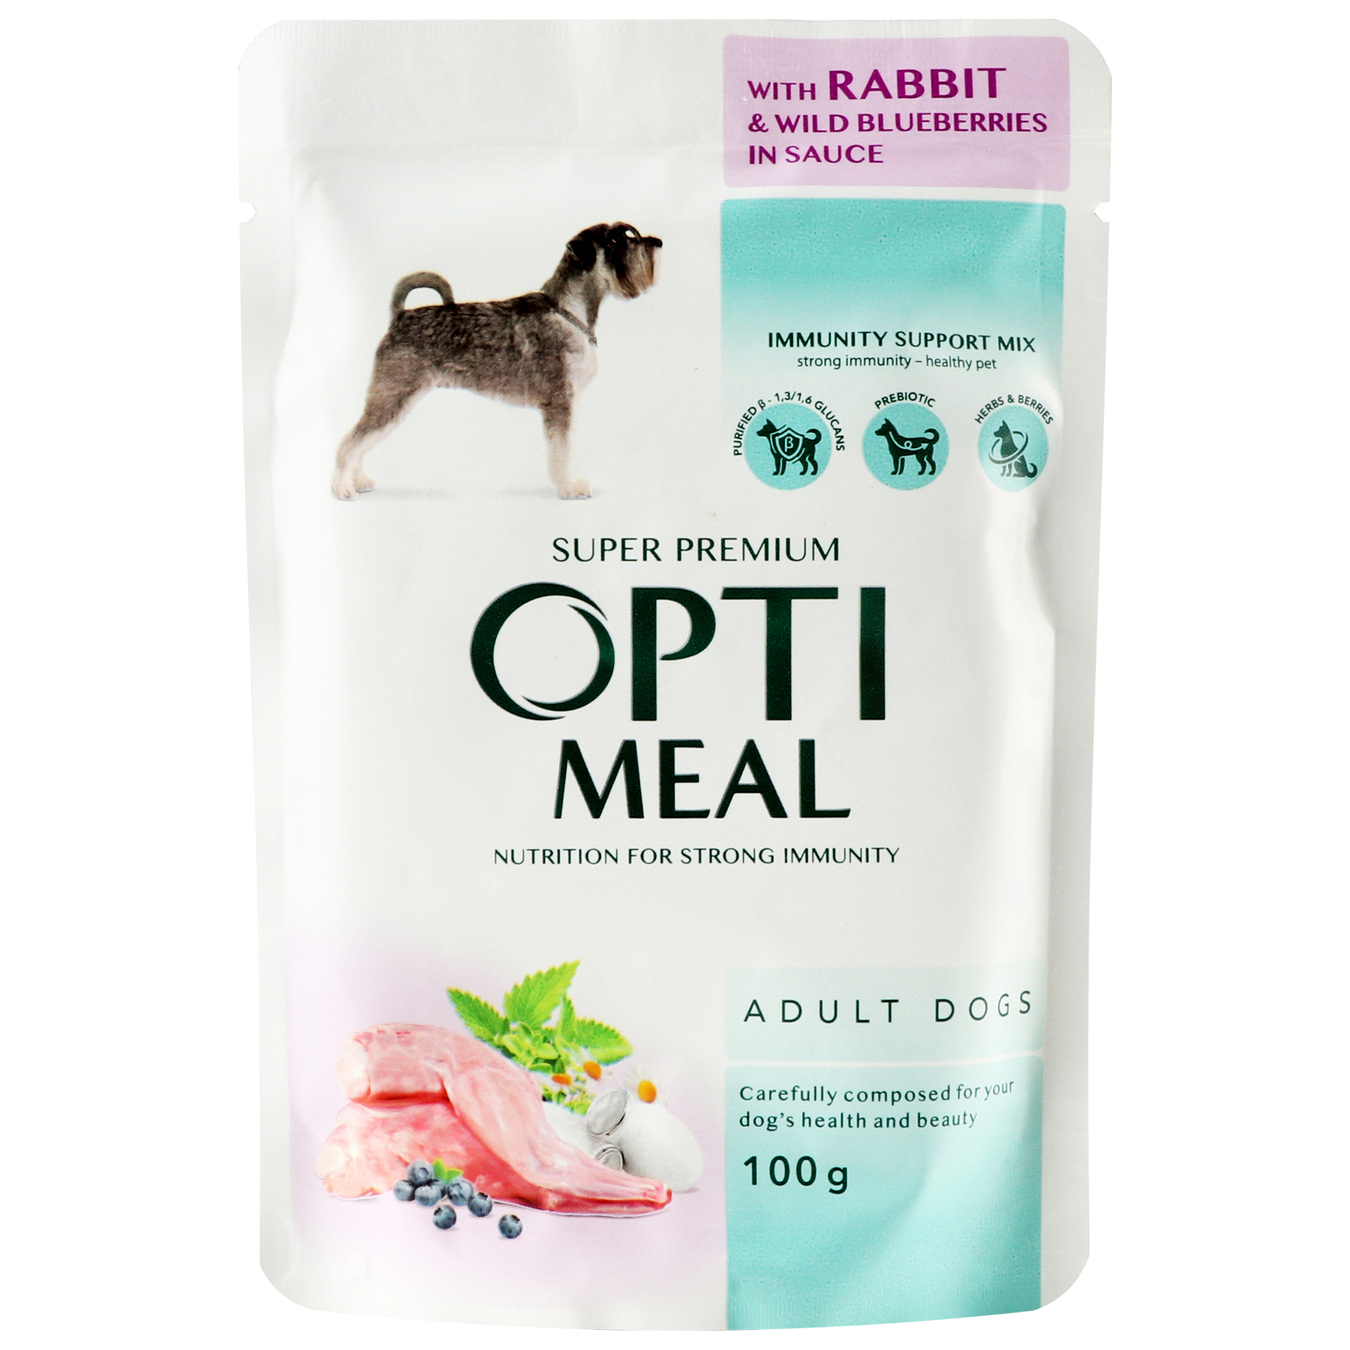 Food for adult dogs Optimeal with rabbit and blueberries in sauce pouch 100g